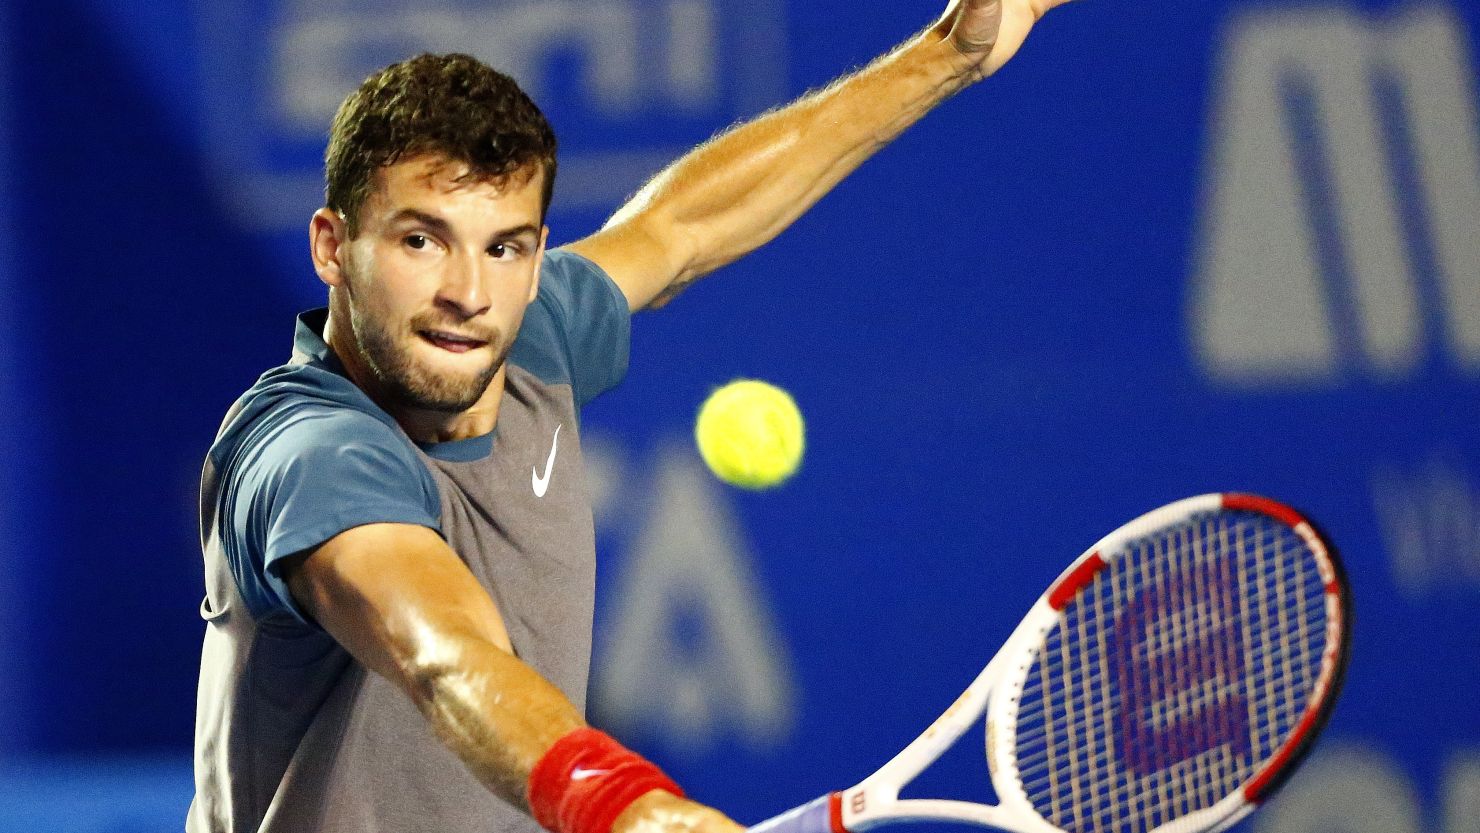 Grigor Dimitrov showed his fighting qualities to win the ATP event in Mexico with a three-set win in the final over Kevin Anderson.